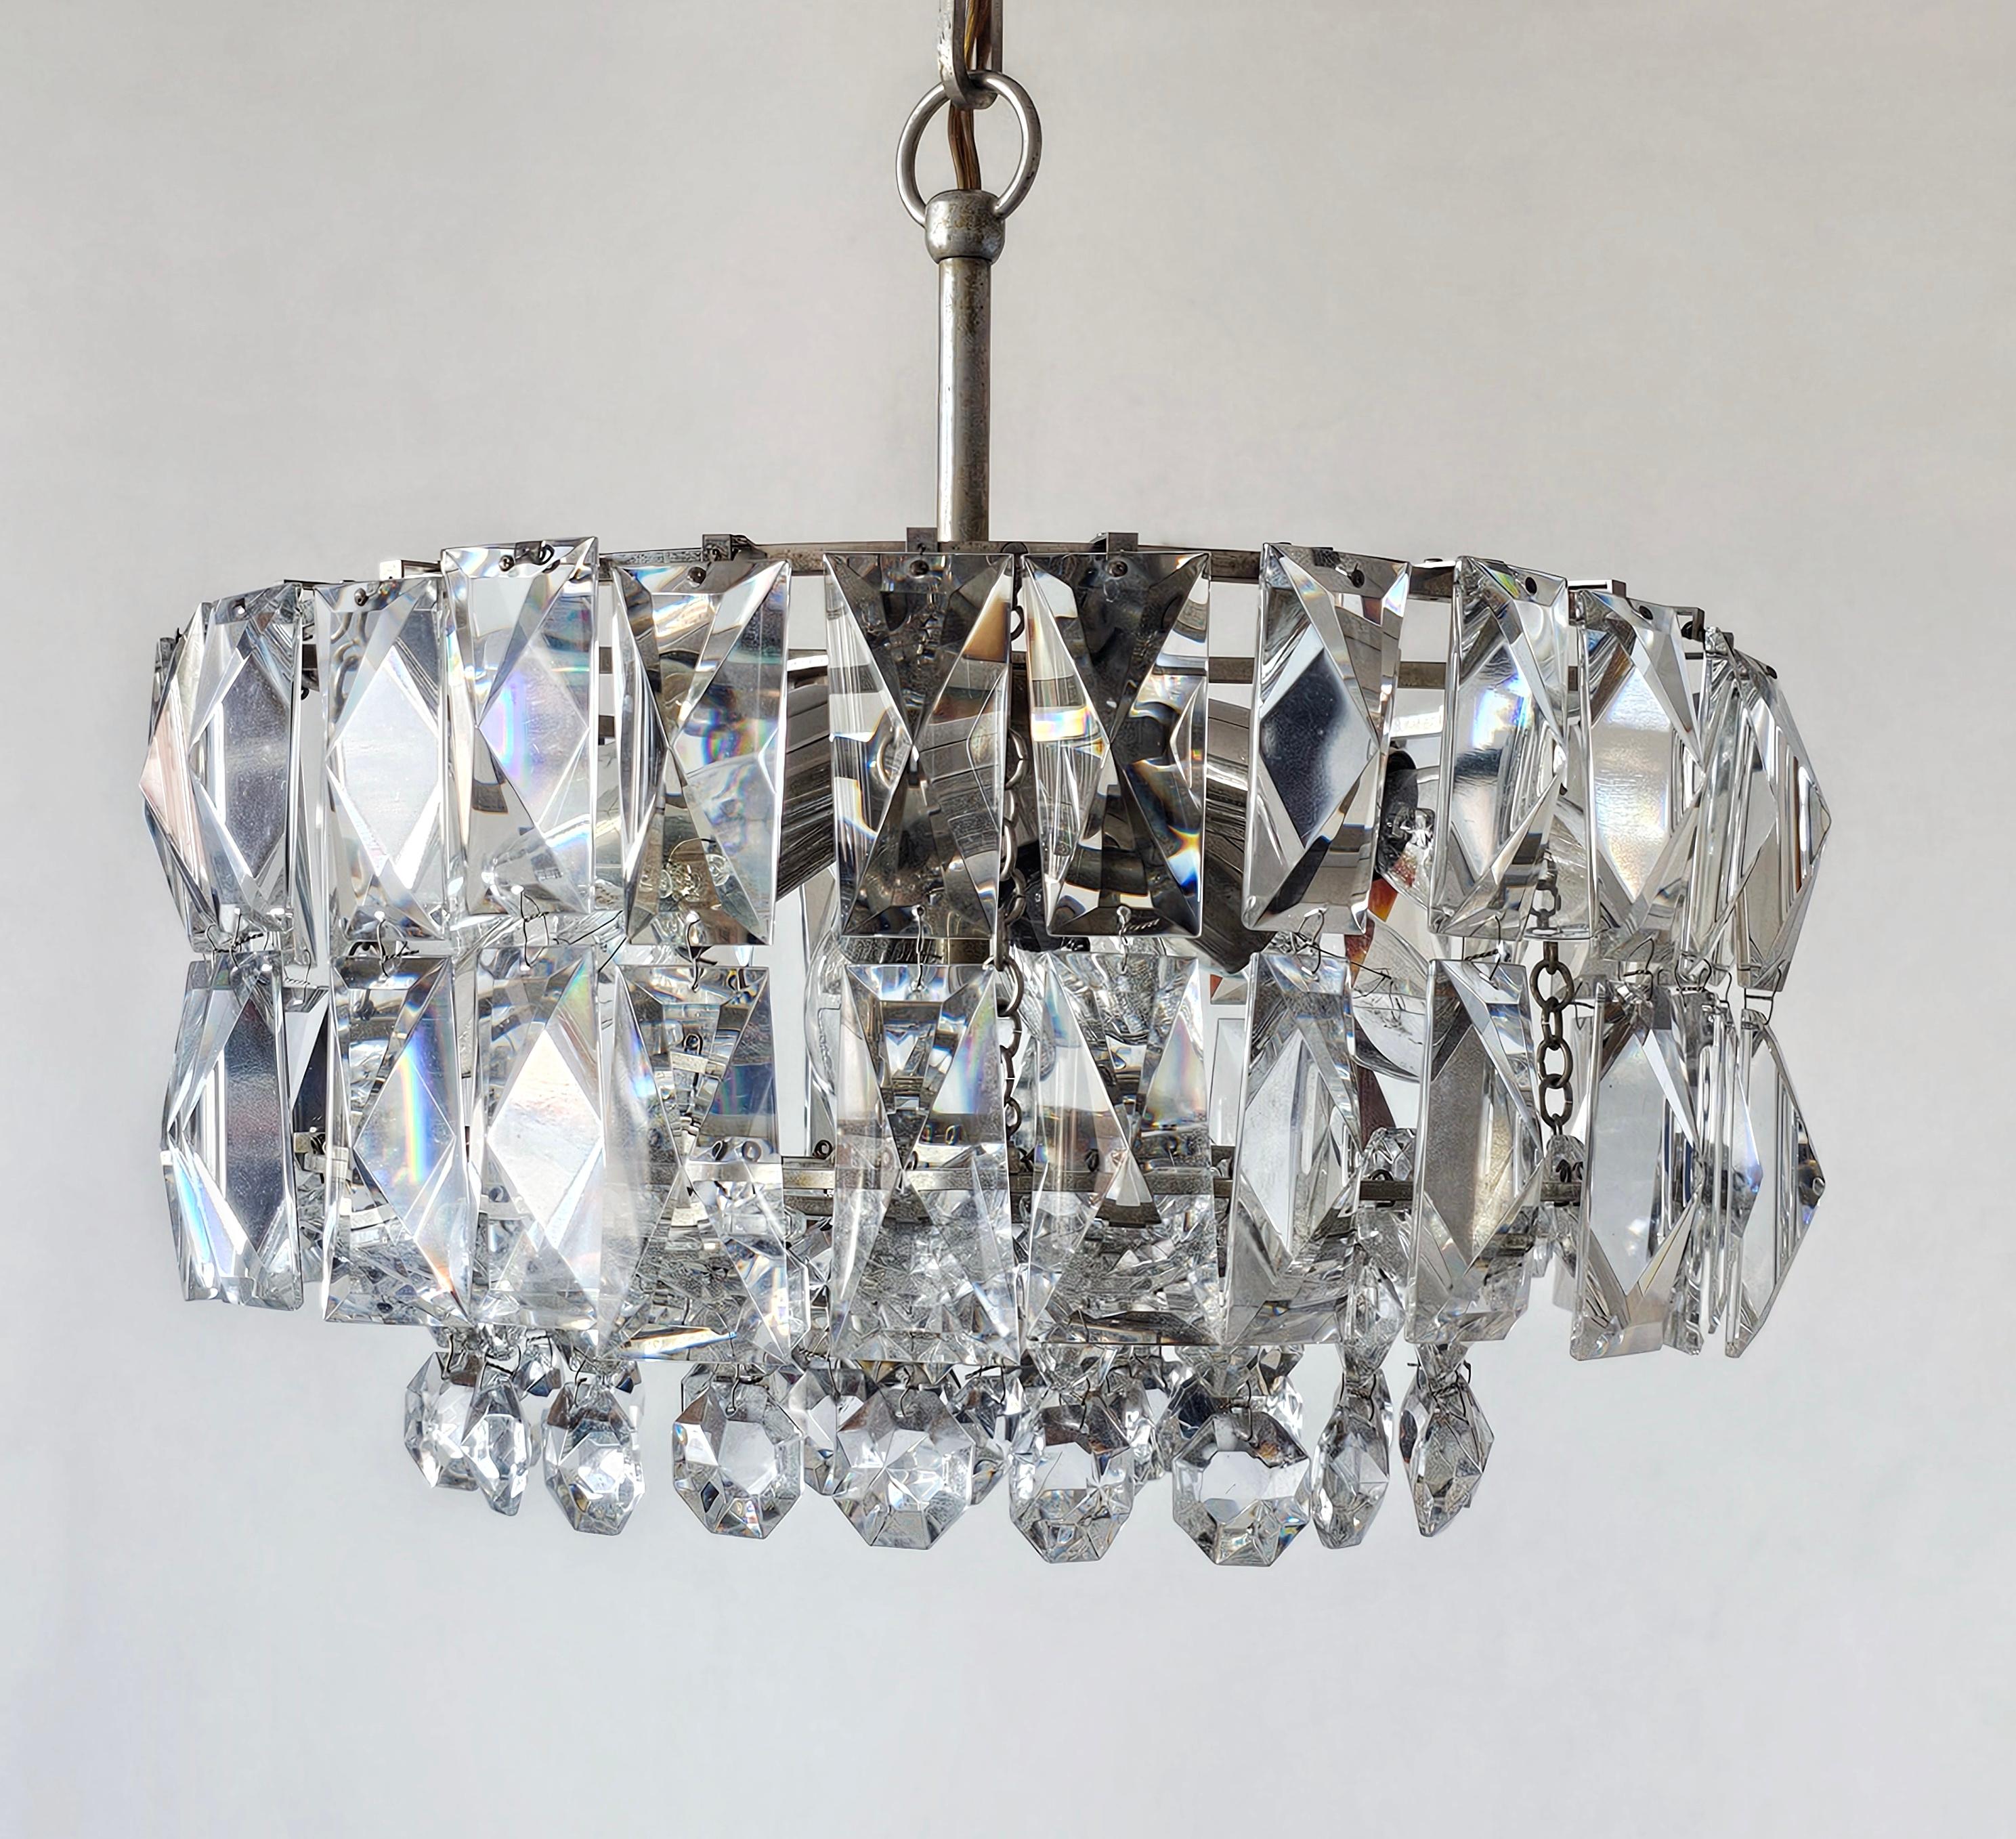 In this listing you will find an elegant Mid Century Modern crystal chandelier with nickel plated fixture manufactured by Bakalowits and Sohne. It features amazing 8 lights, providing enough light for practical uses, as well as craftsmanship with